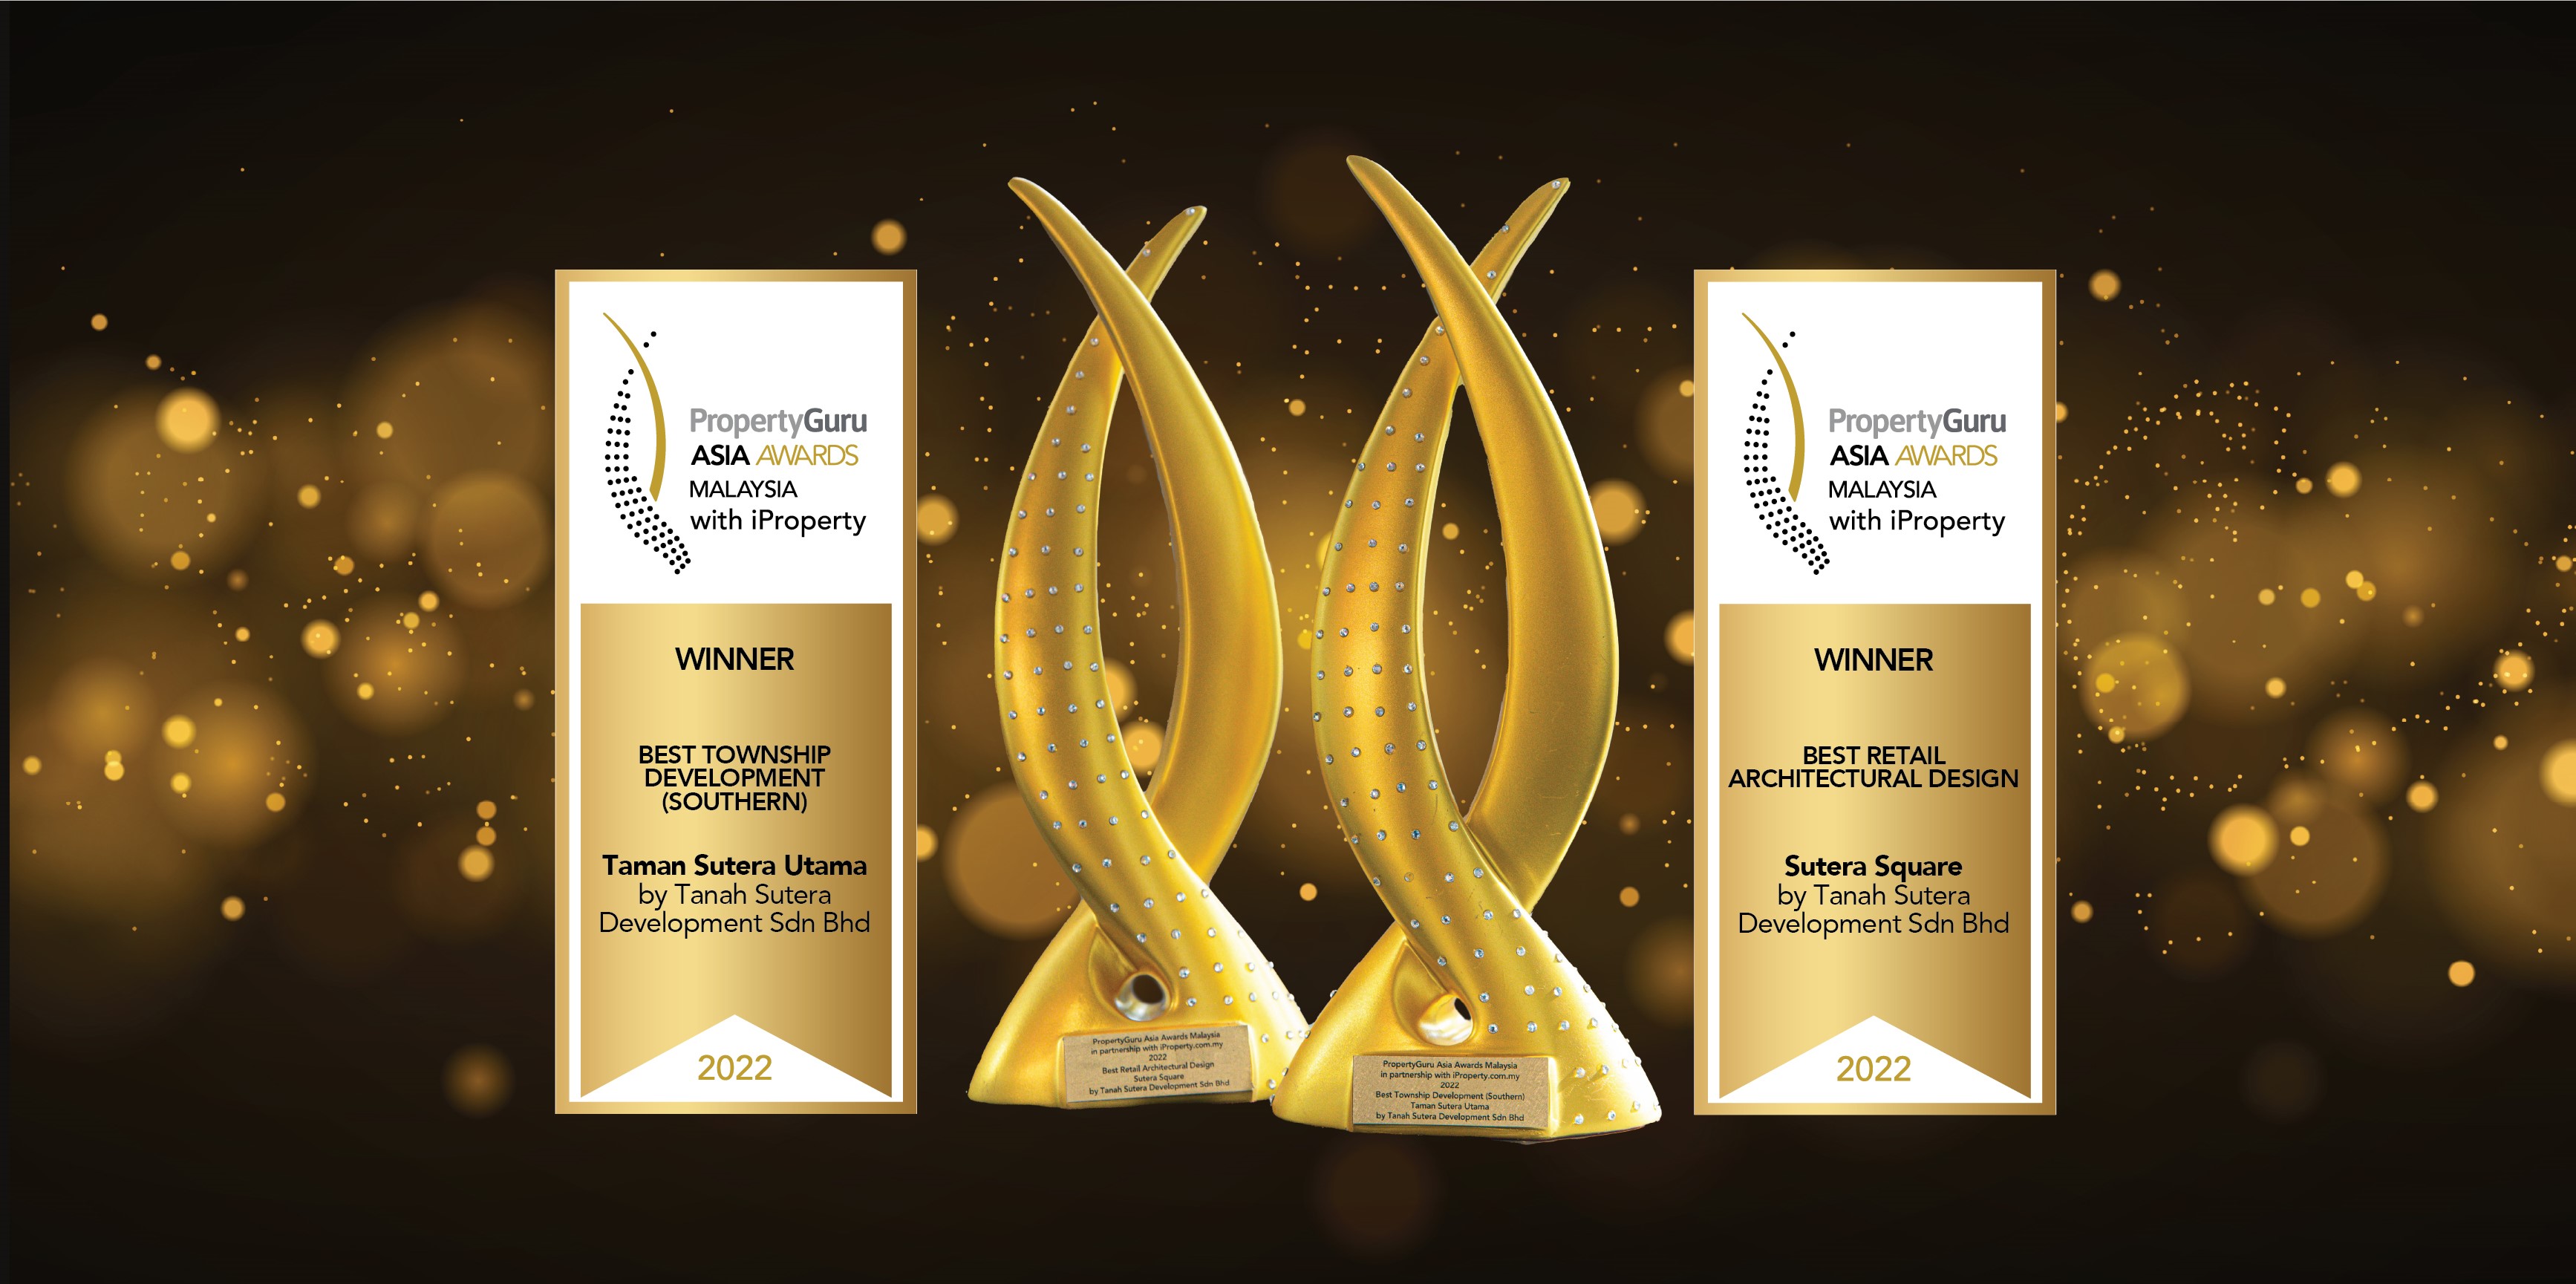 Sutera won the Best Township (Southern) and Best Retail Architectural Design award